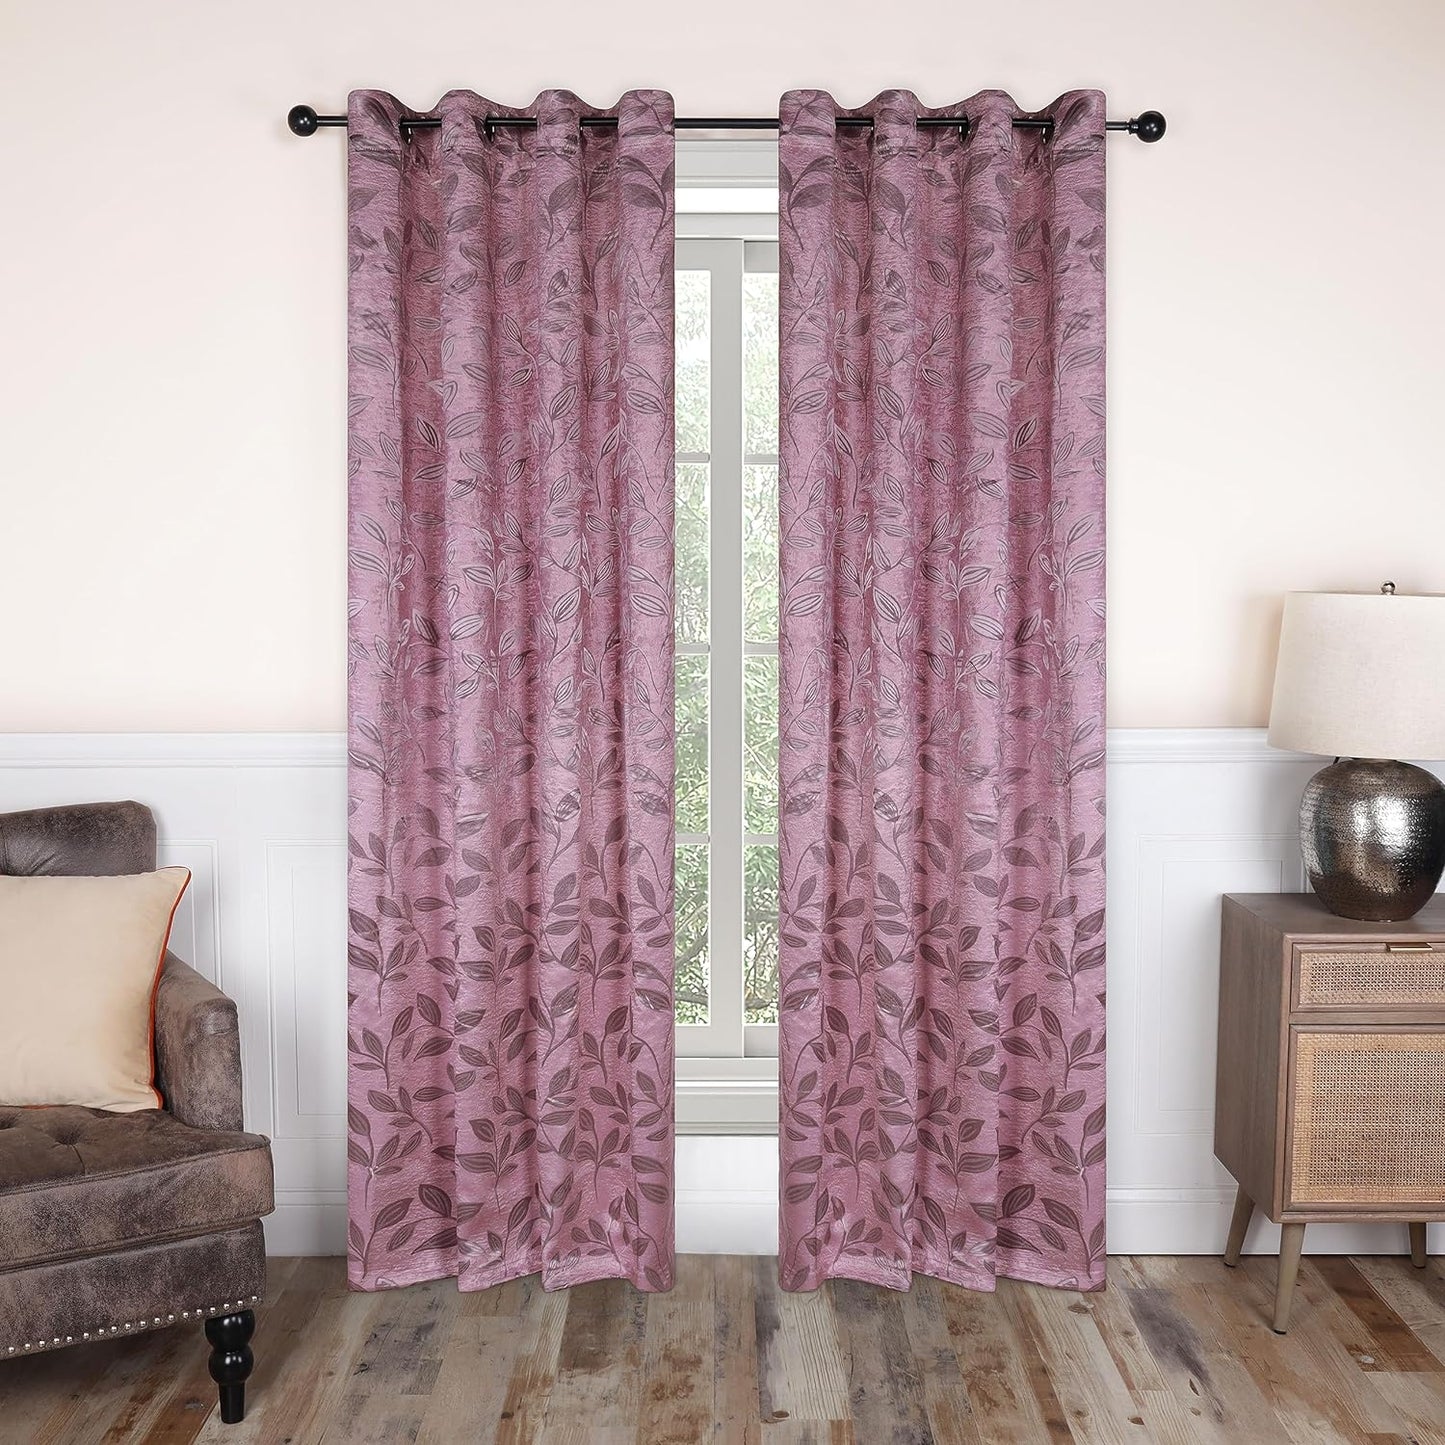 Superior Blackout Curtains, Room Darkening Window Accent for Bedroom, Sun Blocking, Thermal, Modern Bohemian Curtains, Leaves Collection, Set of 2 Panels, Rod Pocket - 52 in X 63 In, Nickel Black  Home City Inc. Blush 52 In X 72 In (W X L) 